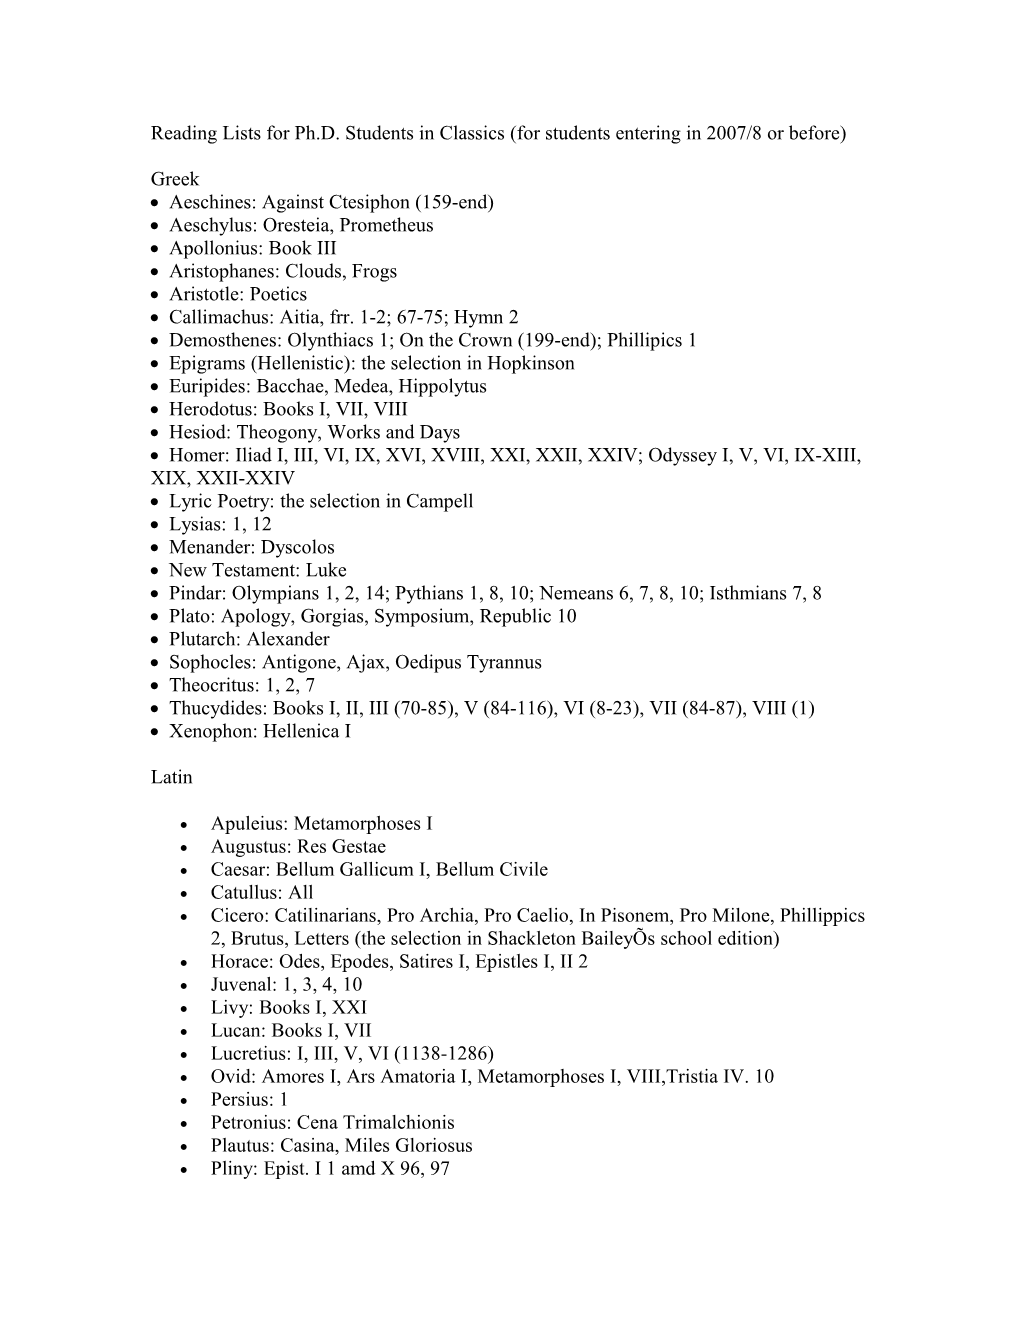 Reading Lists for Ph.D. Students in Classics (For Students Entering in 2007/8 Or Before)